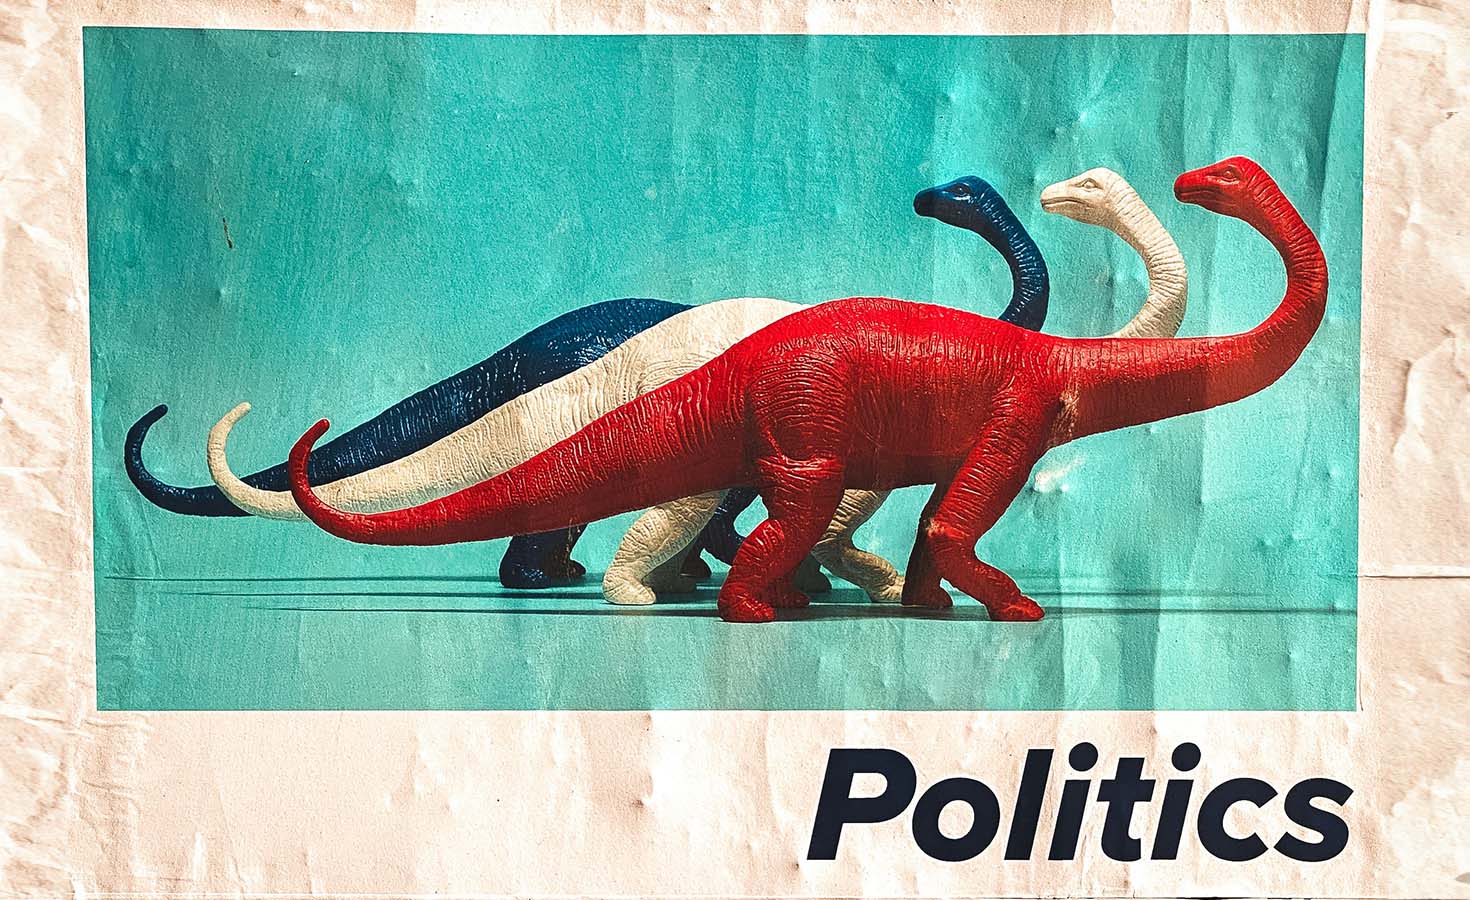 Red, white, and blue toy dinosaurs with the word 'politics' in the corner of the image.